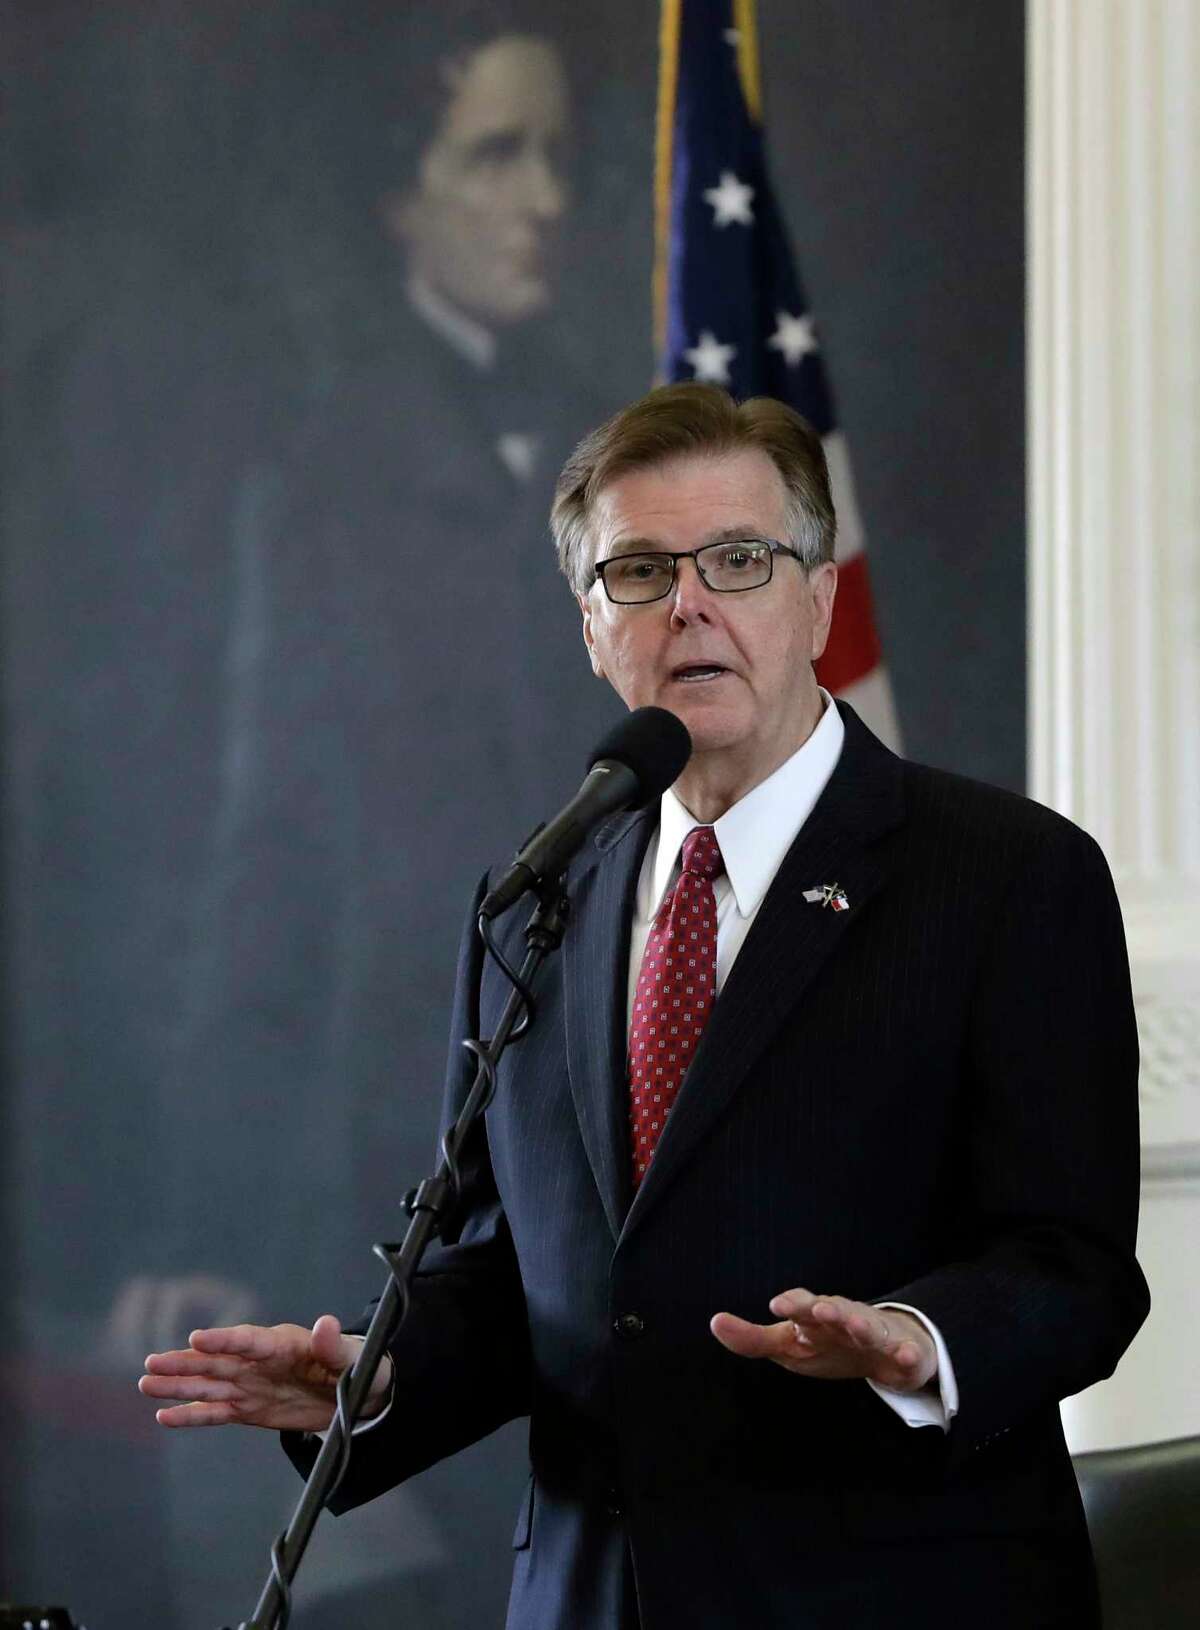 Texas Lt. Gov. Dan Patrick presides over the senate in Austin, Texas, Tuesday, July 18, 2017. State lawmakers begin a special legislative session Republican Gov. Greg Abbott felt compelled to call in order to tackle conservative priorities that stalled previously, chief among them a "bathroom bill" targeting transgender people. (AP Photo/Eric Gay)